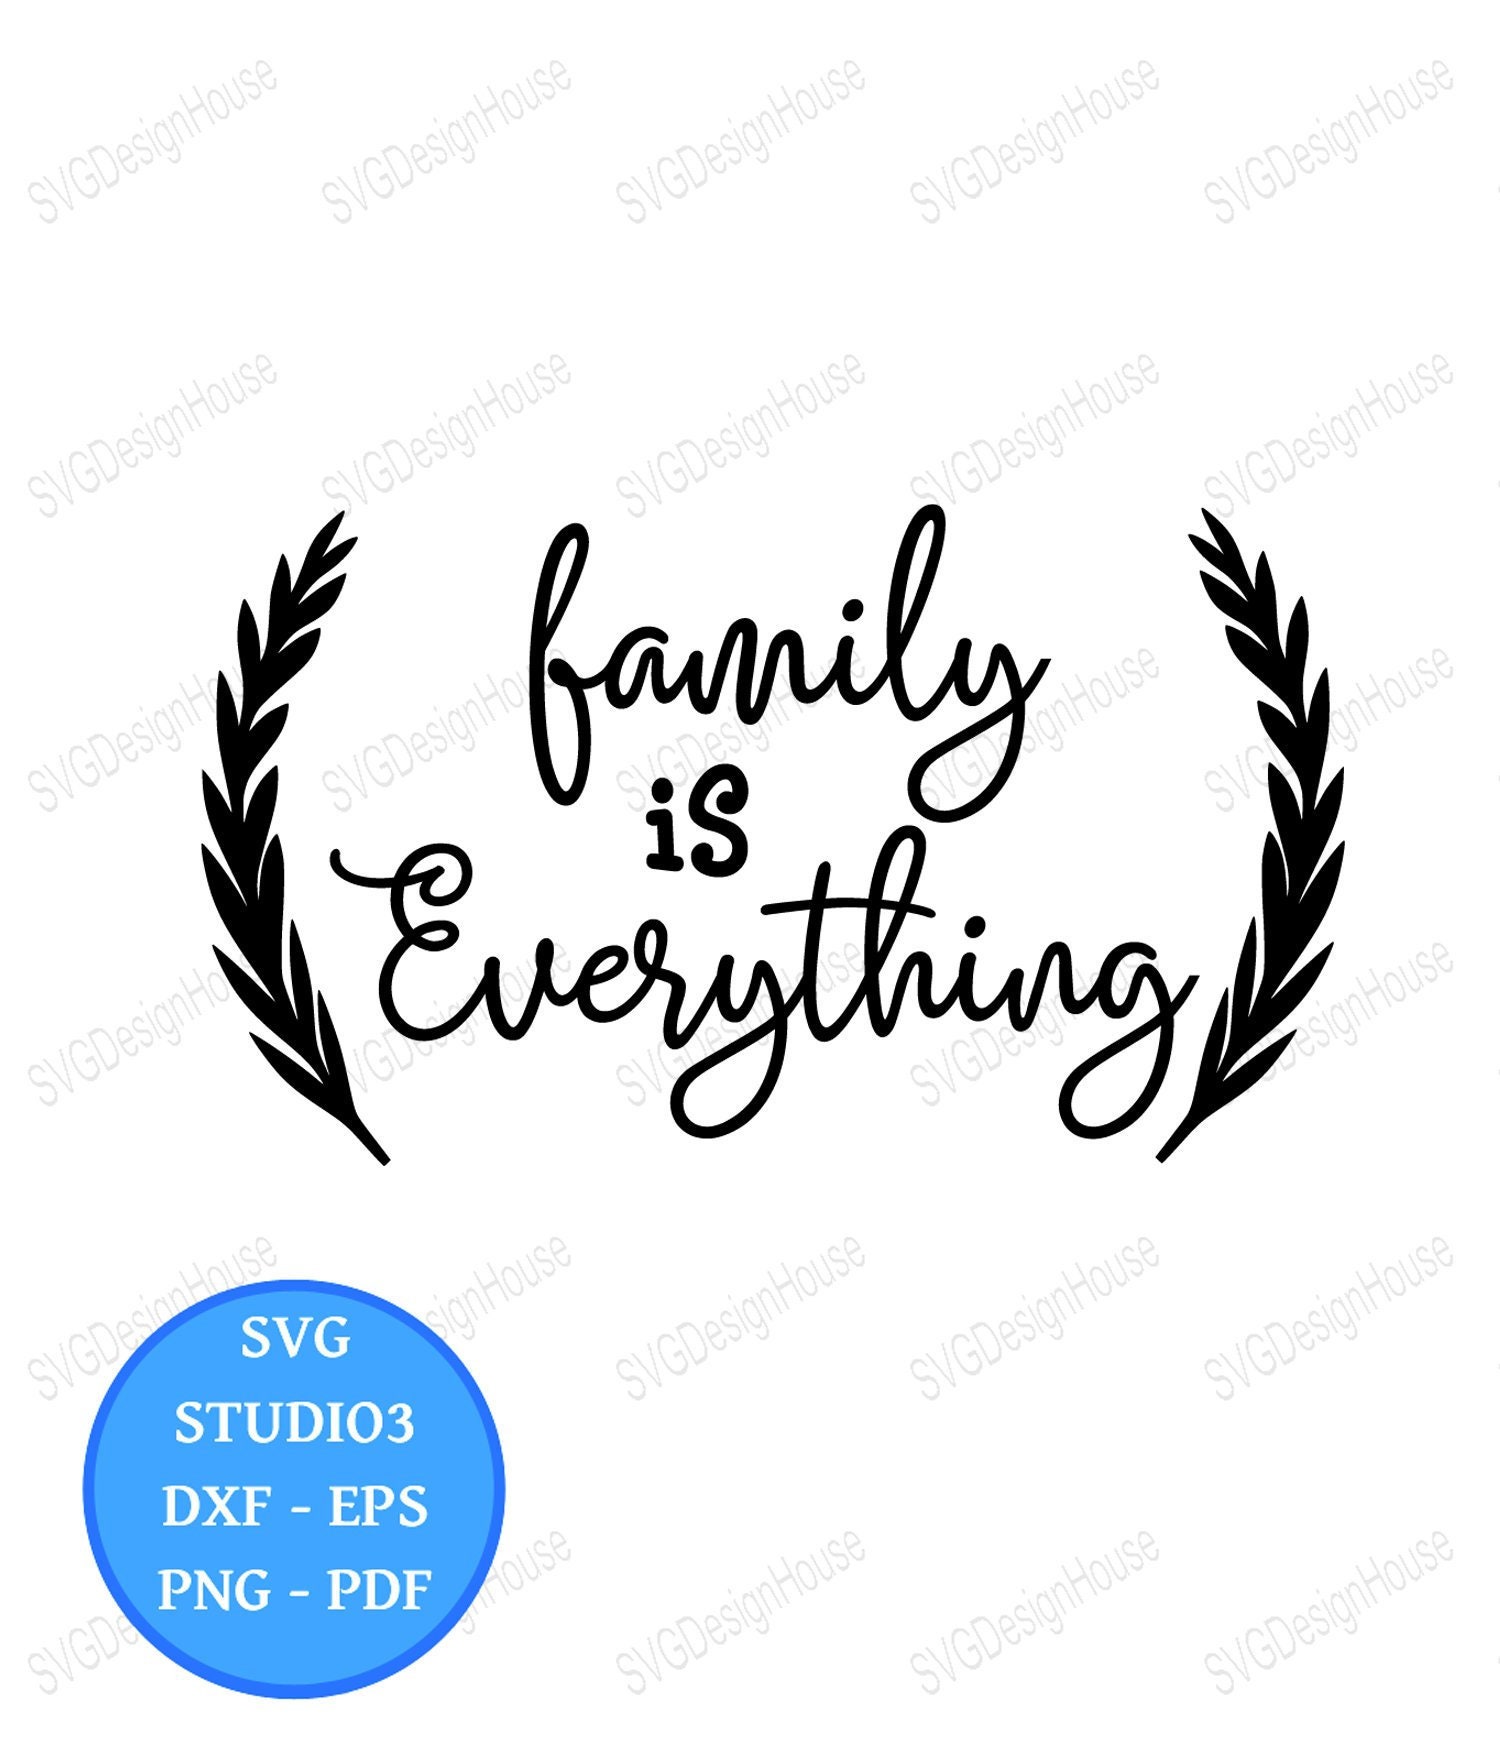 Family Is Everything svg Home Family Studio3 Dxf Png Pdf | Etsy